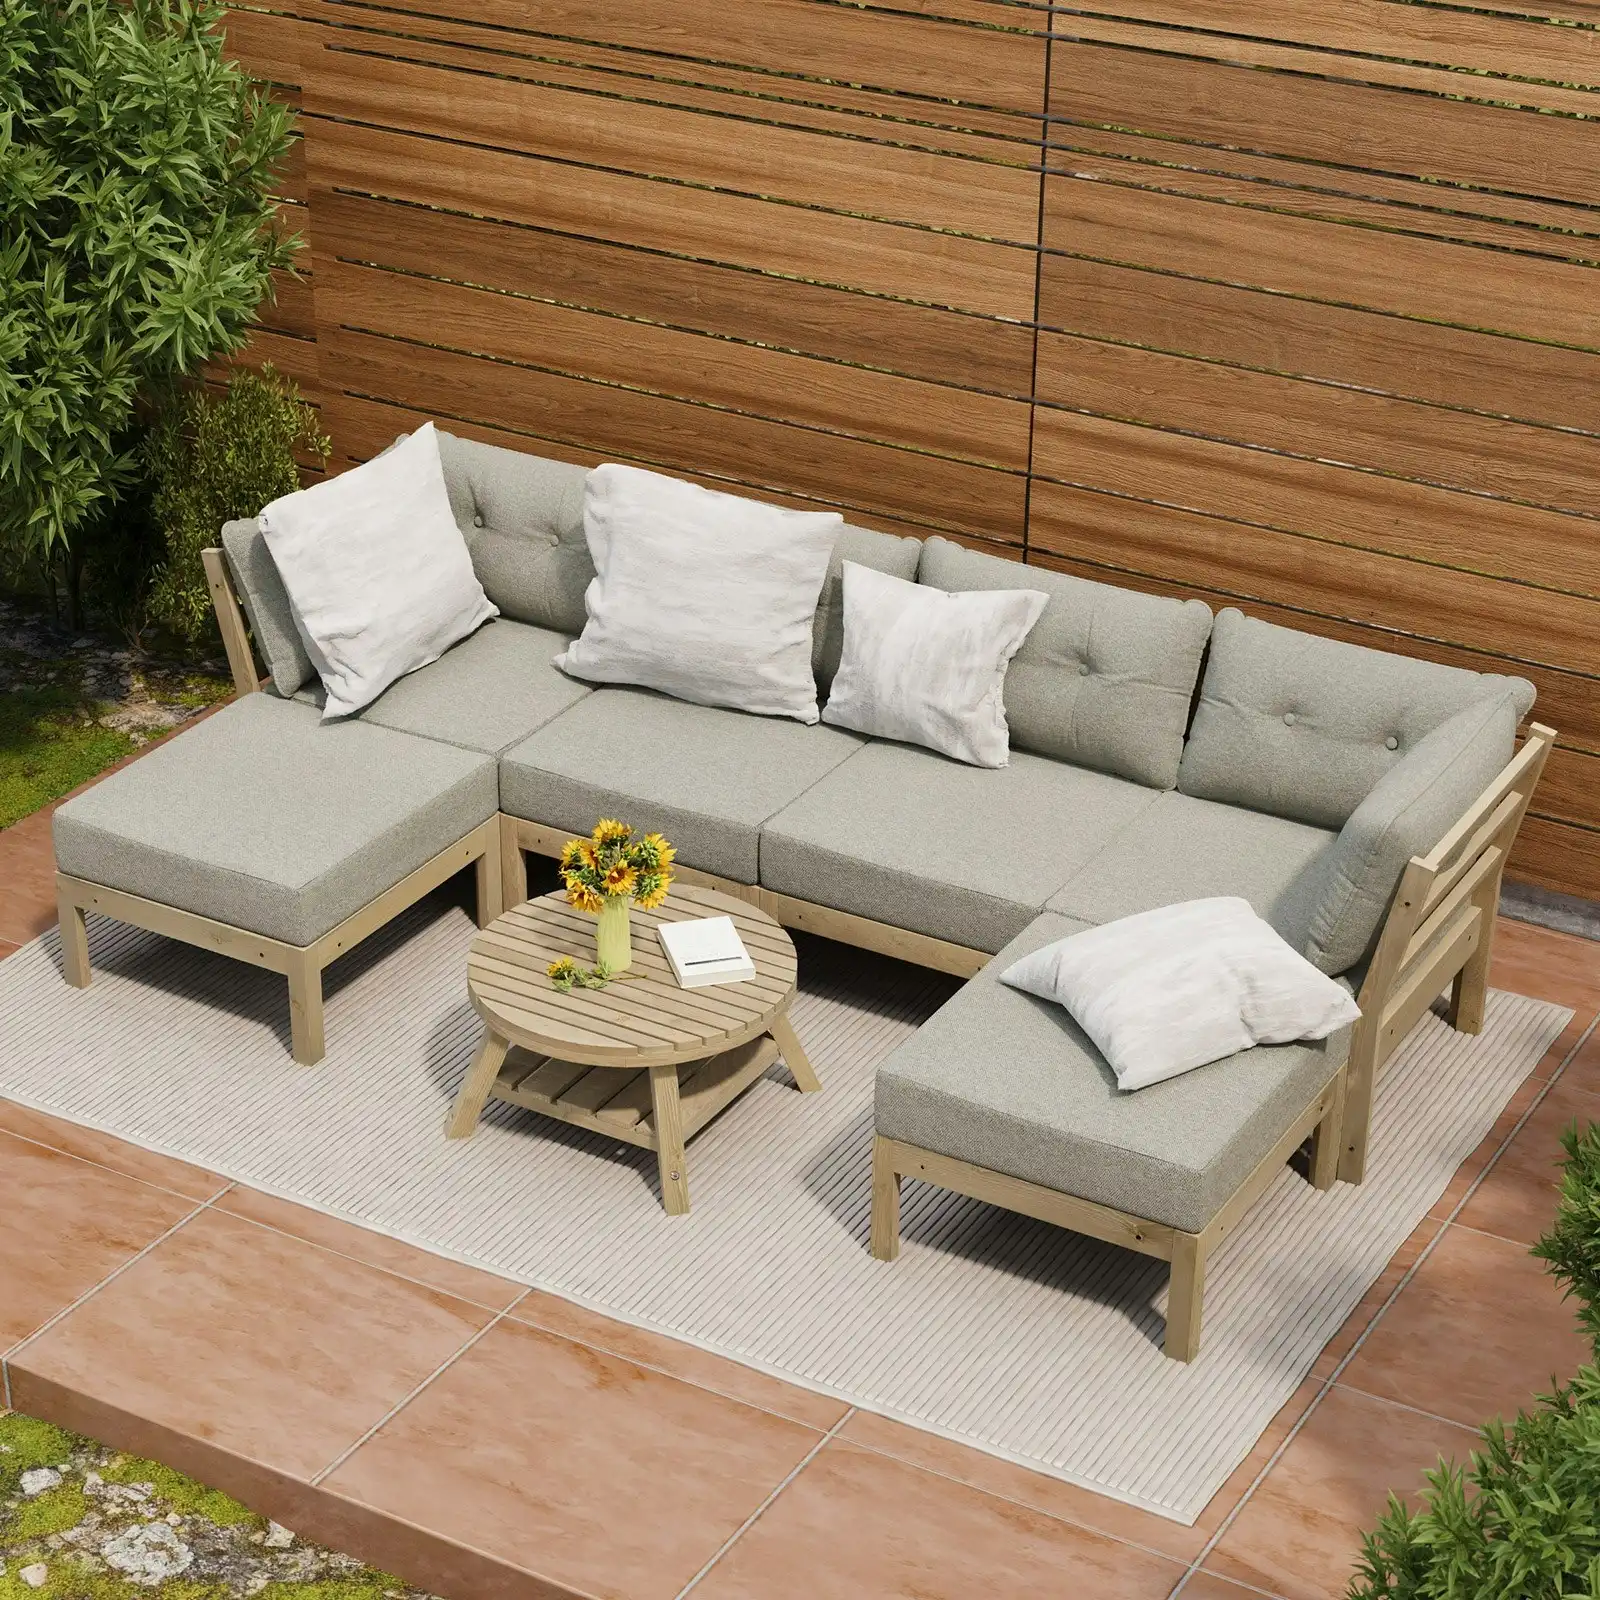 Livsip 7 Piece Outdoor Lounge Sofa Set Garden Furniture Dining Table Chairs